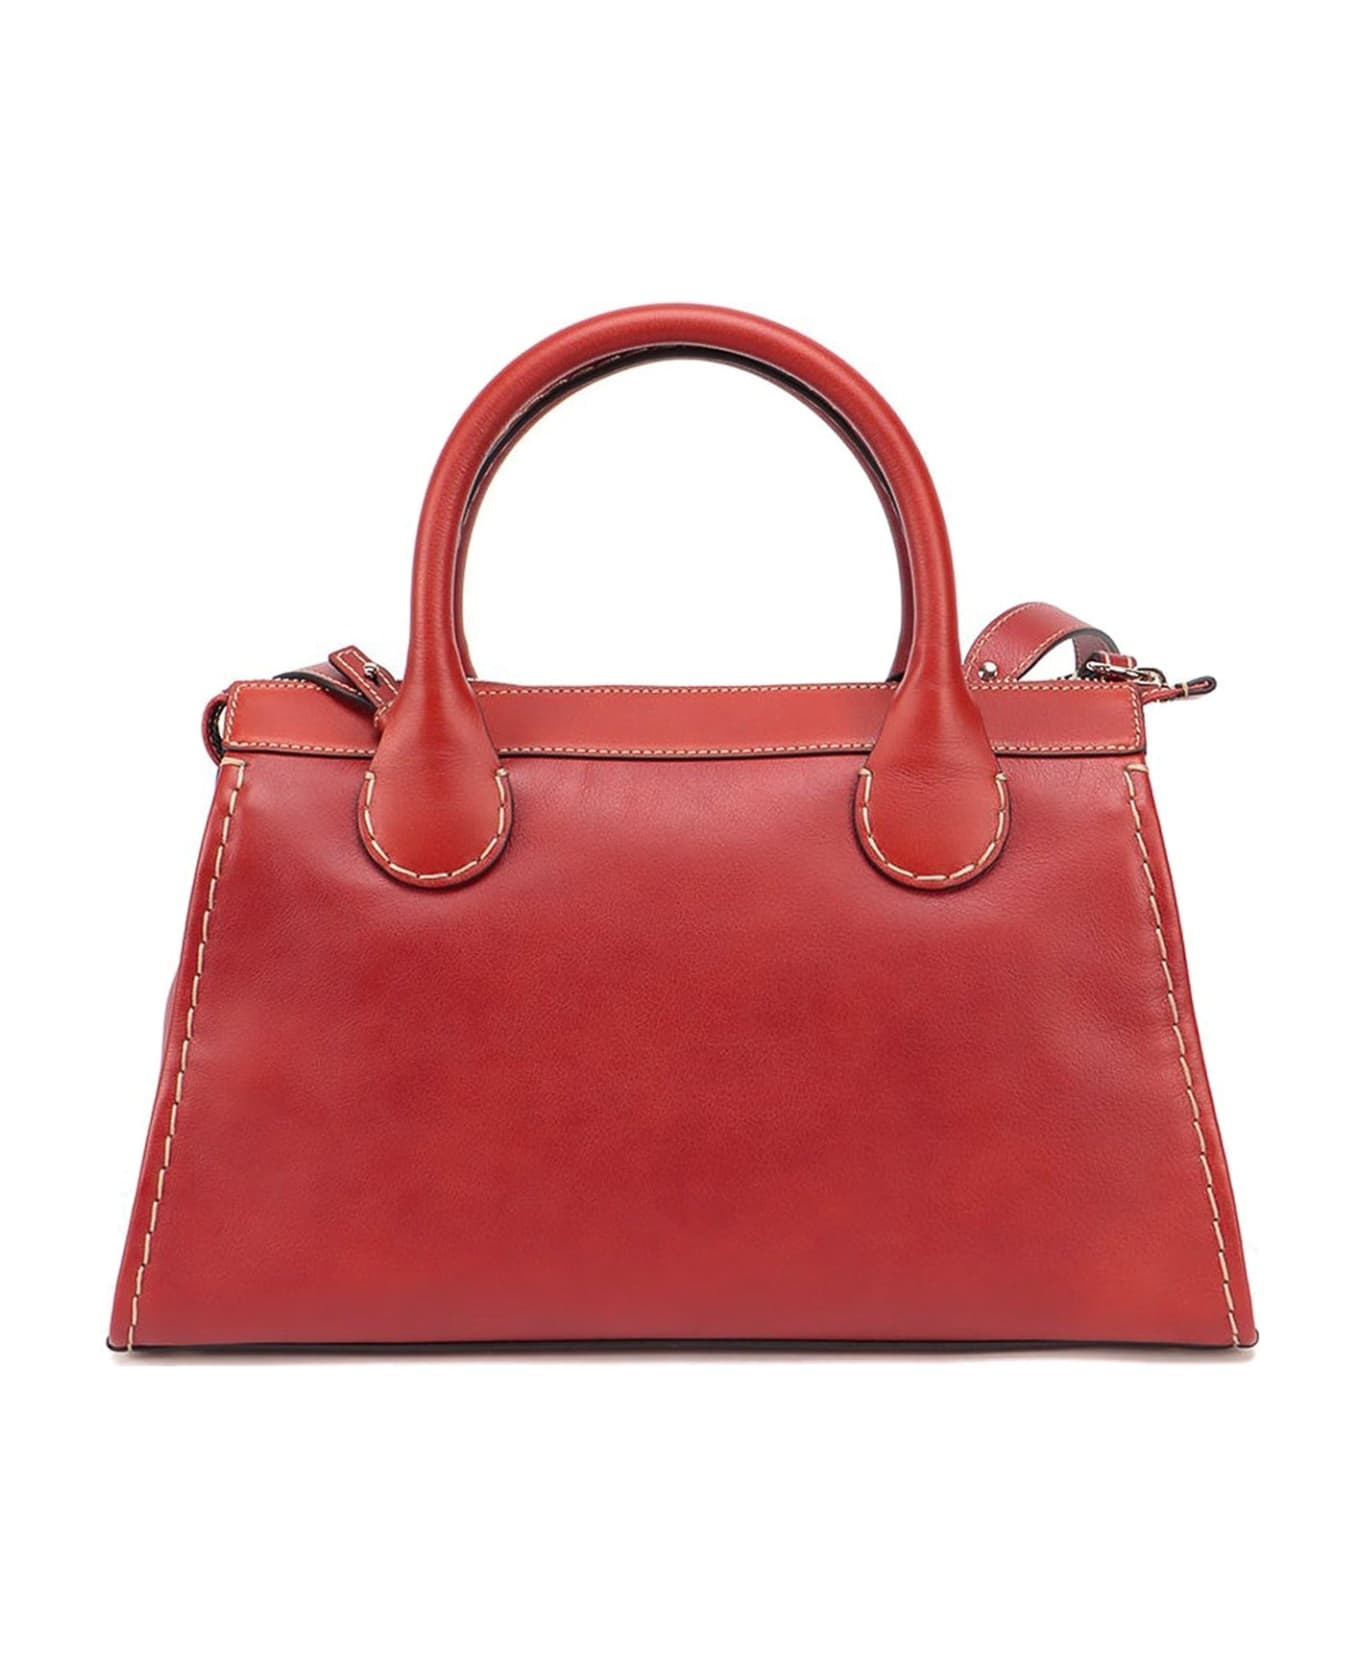 Chloé Edith Leather Tote Bag - Brown トートバッグ